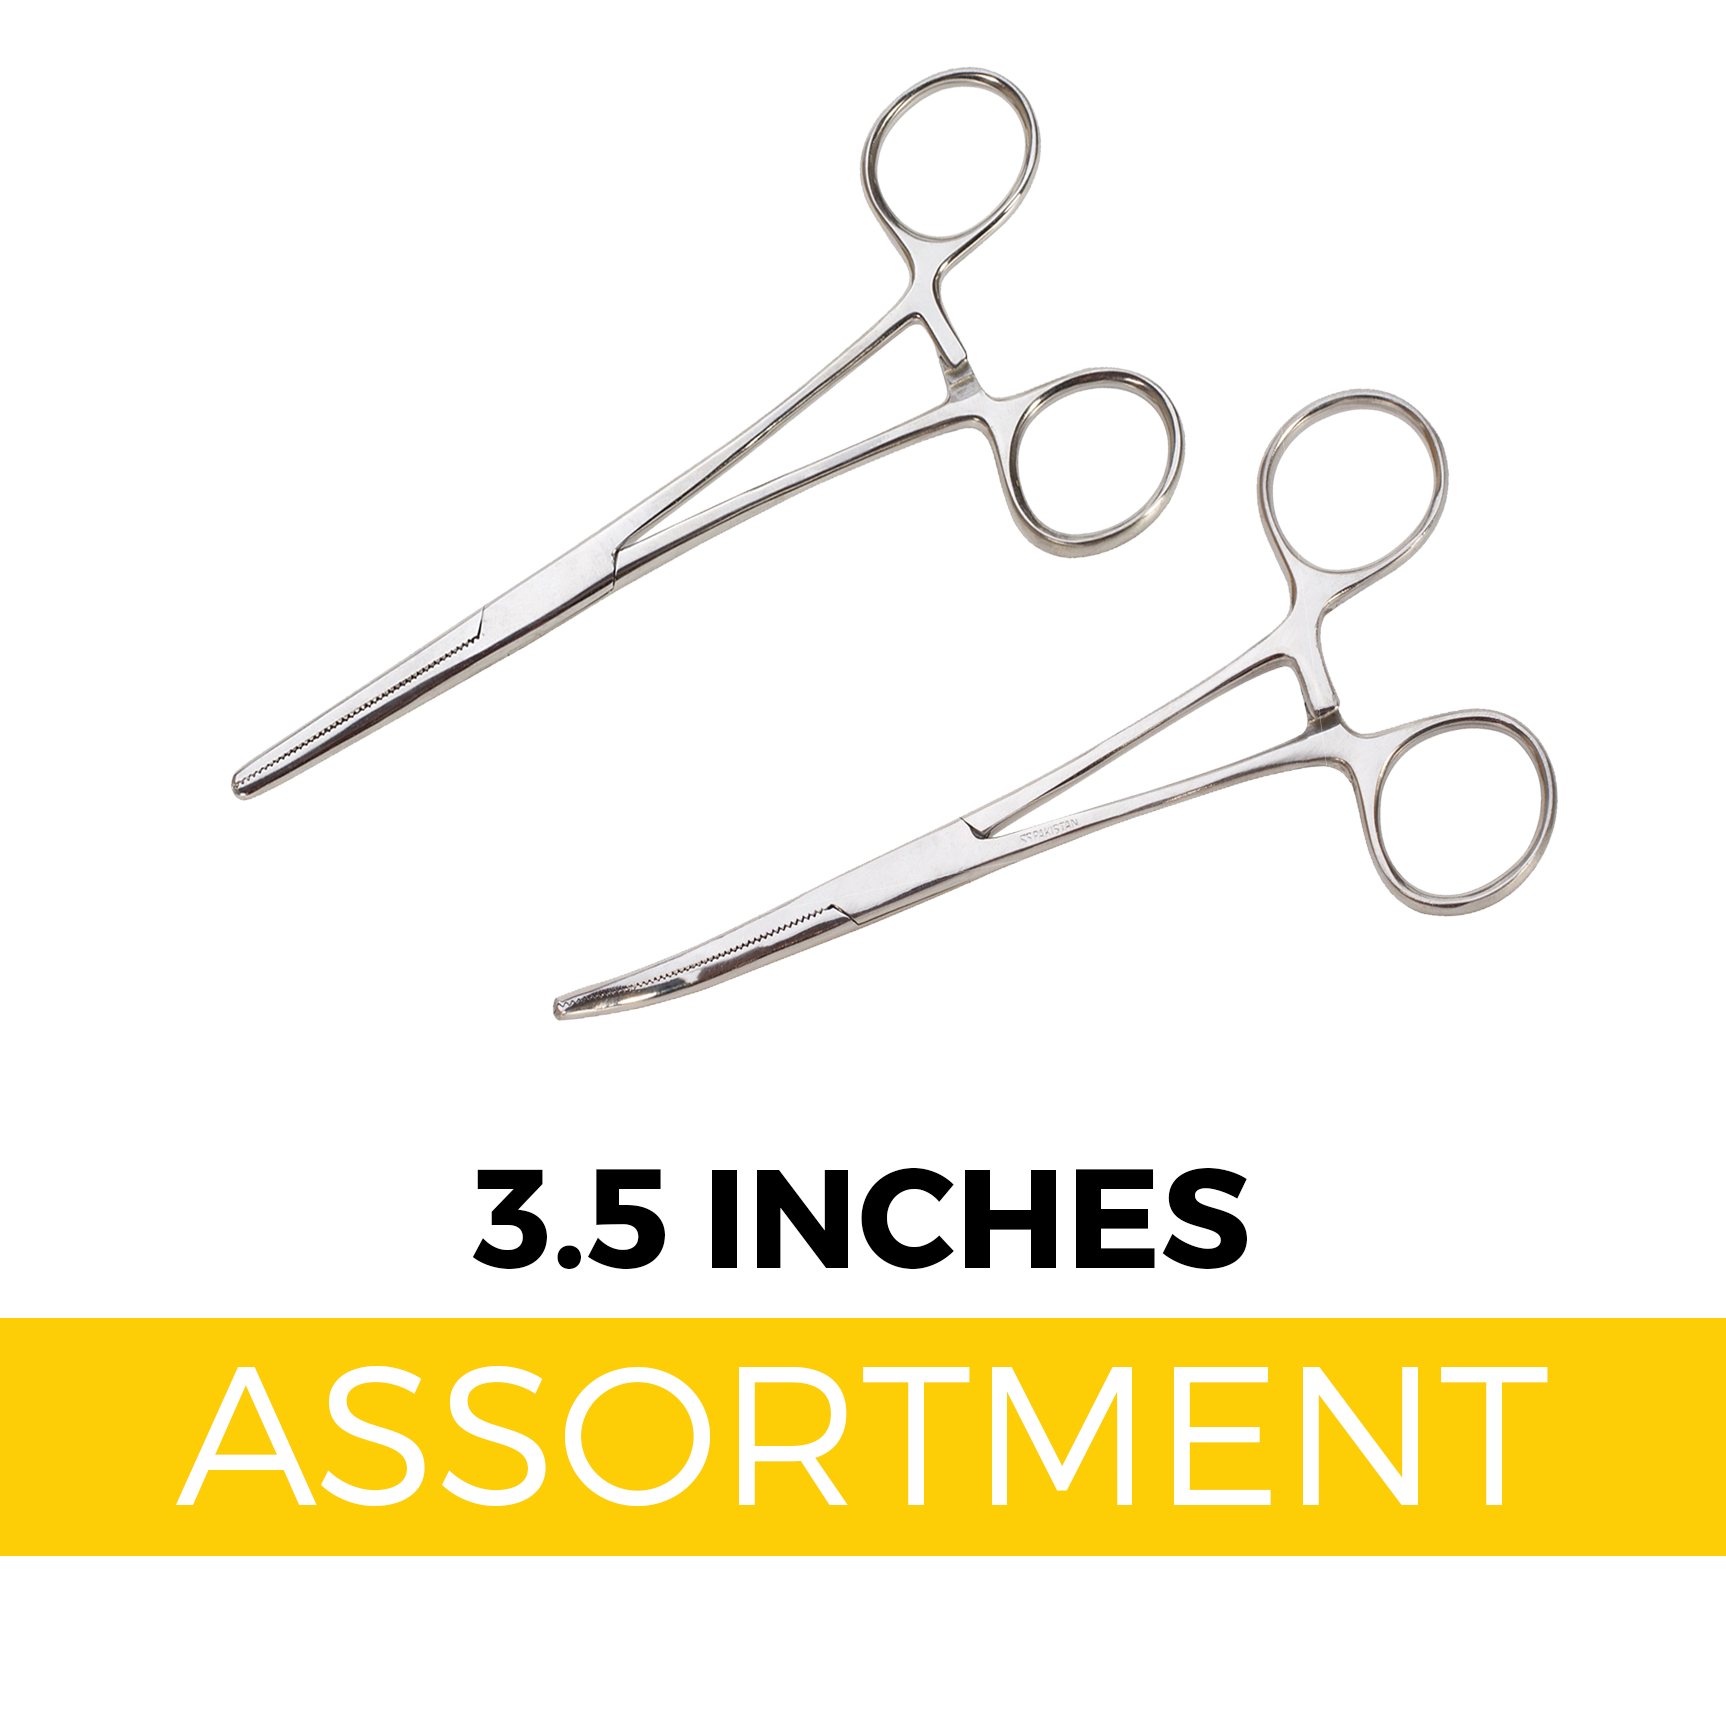 Handy Clamps - 3.5" Forceps Assortment (20 pc Display)